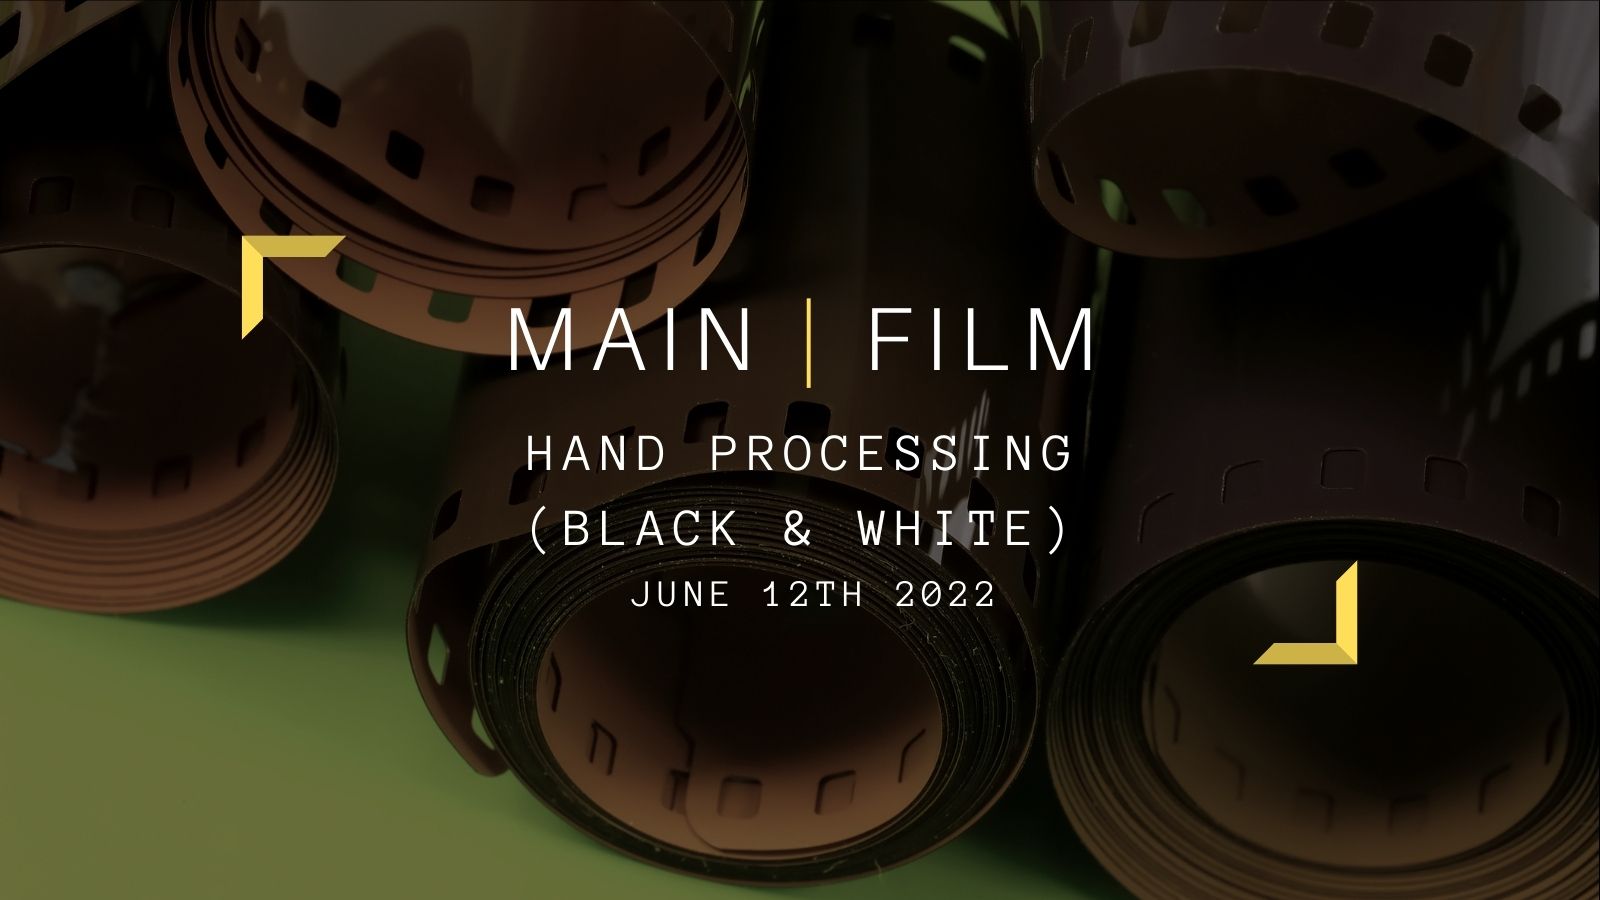 Hand processing (Black & White) | In-person